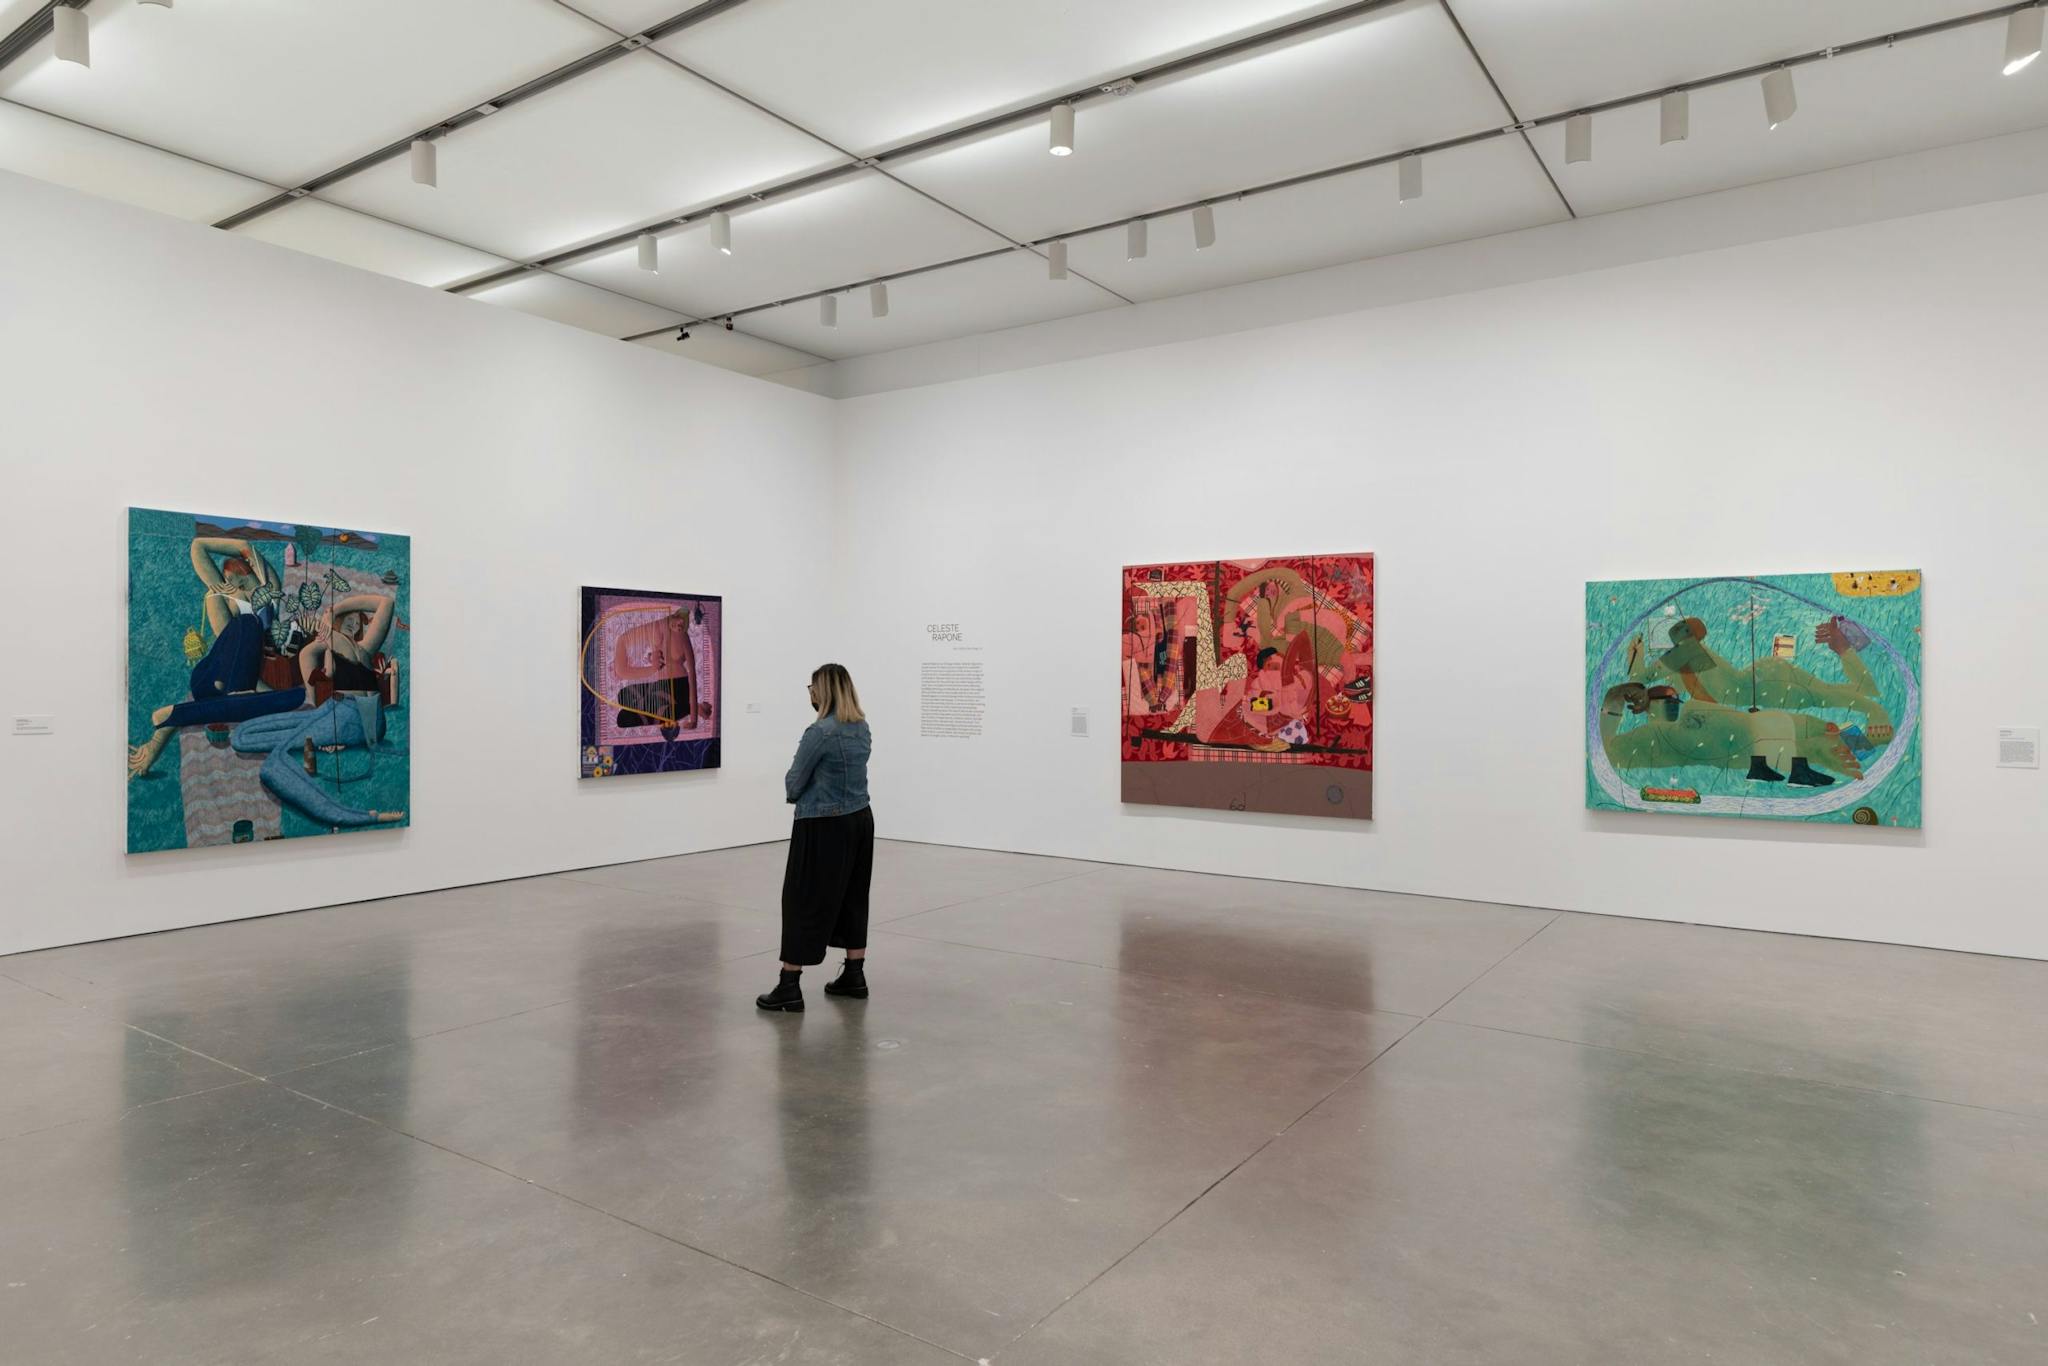 A woman stands in the center of the gallery space, taking in figurative paintings.